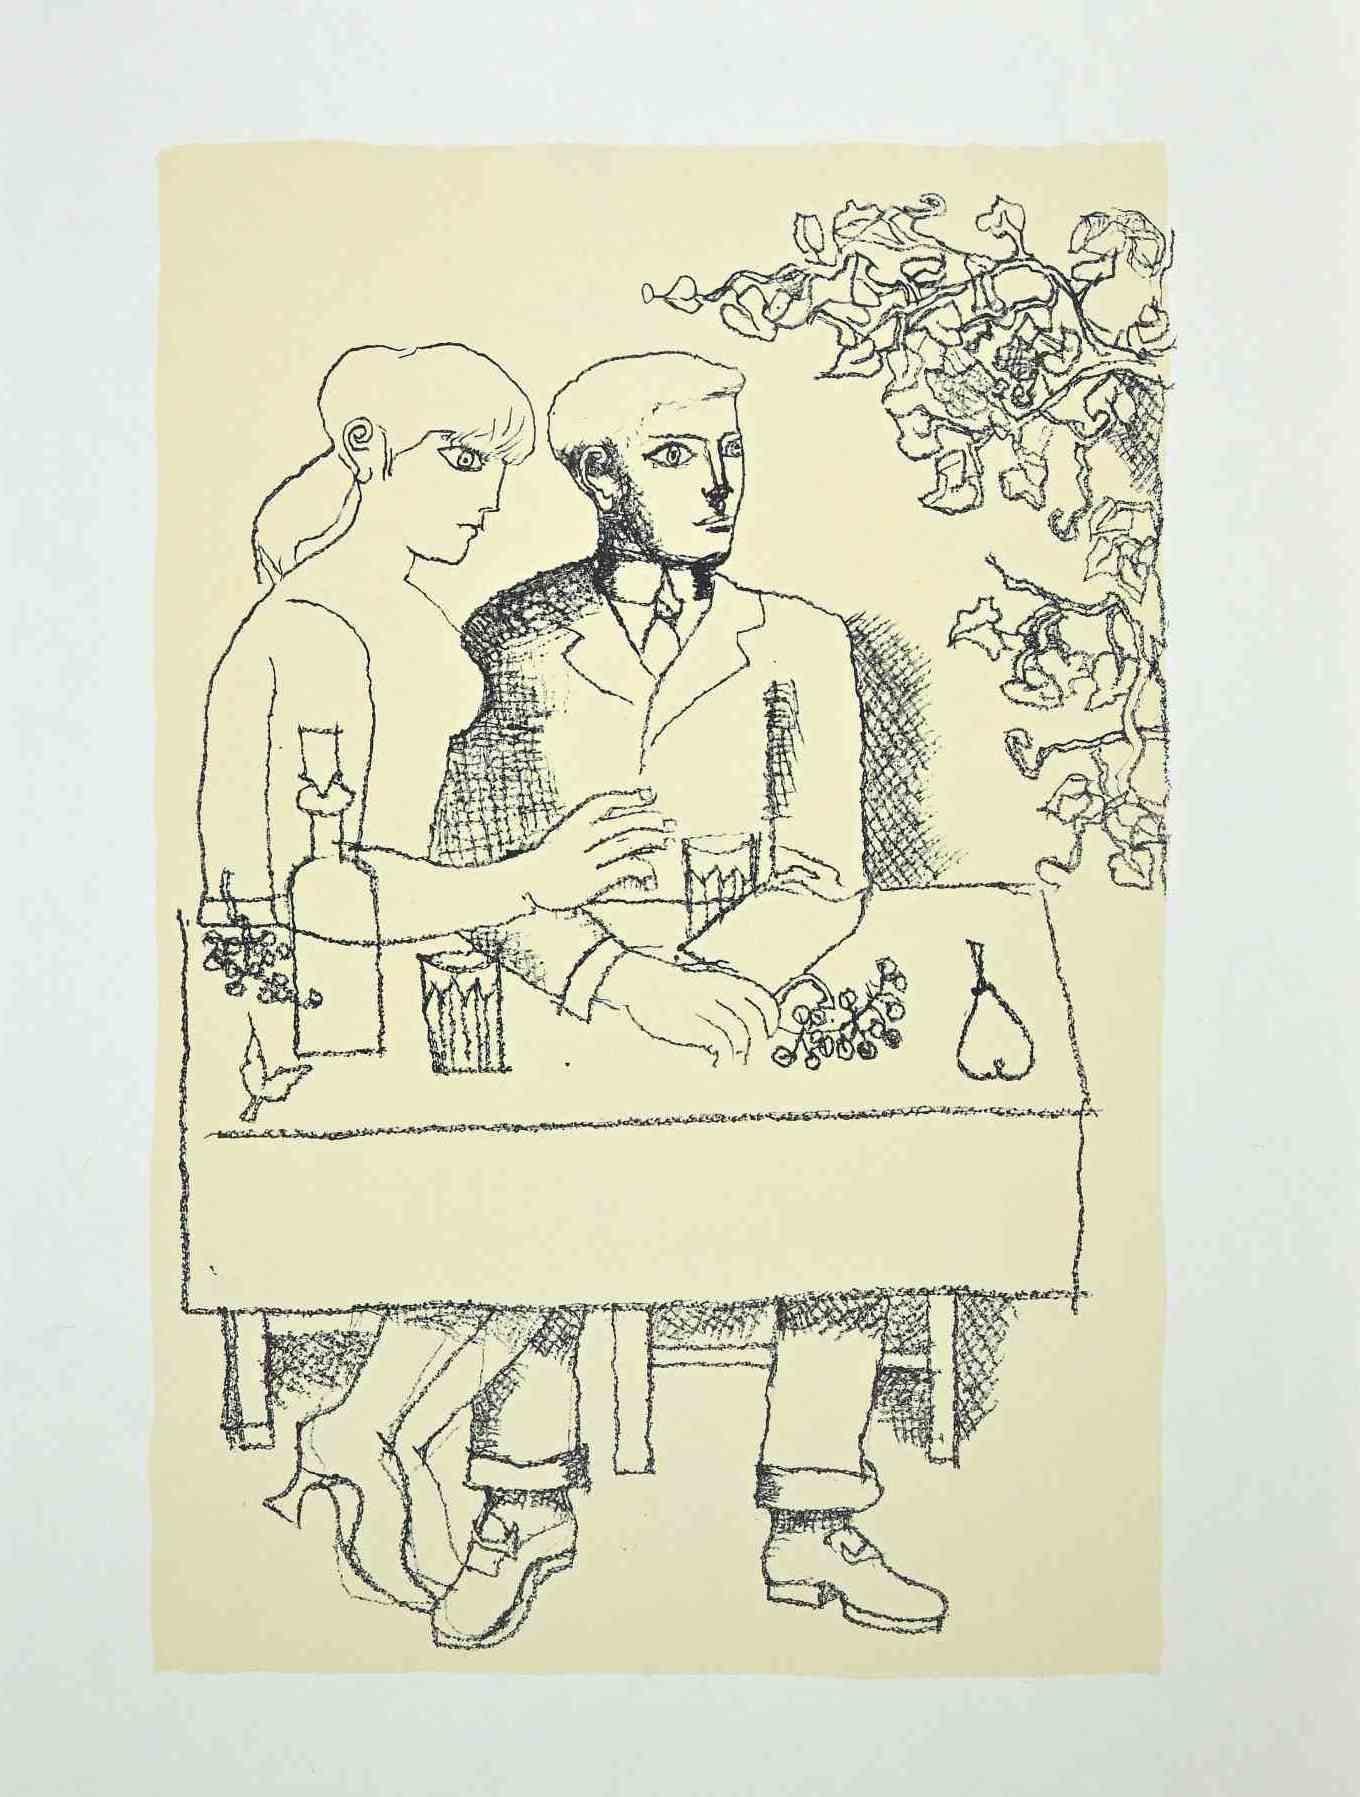 Loving Couple is an original vintage offset print on ivory-colored paper, realized by Franco Gentilini ( Italian Painter, 1909-1981), in 1970s.

The state of preservation of the artwork is excellent.

Franco Gentilini ( Italian Painter, 1909-1981):